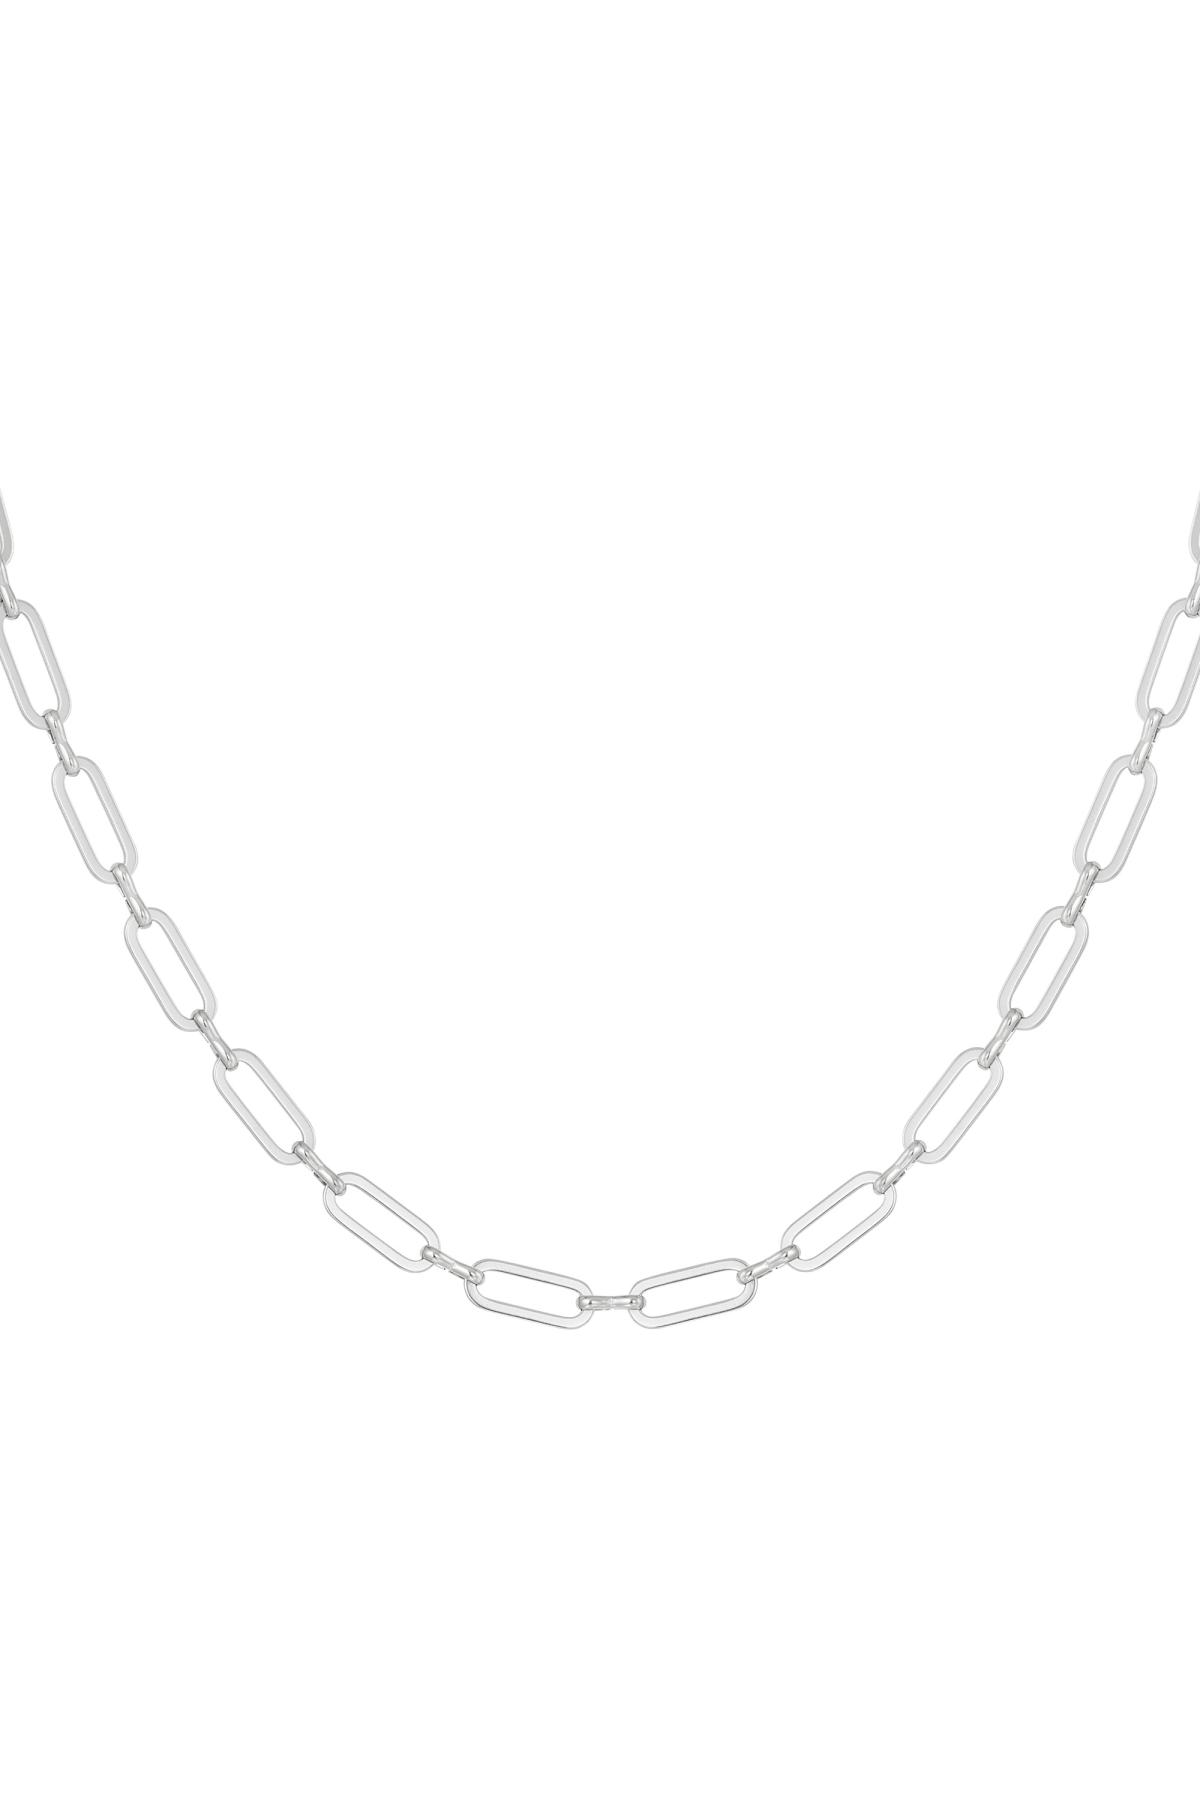 Link chain subtle Silver Stainless Steel